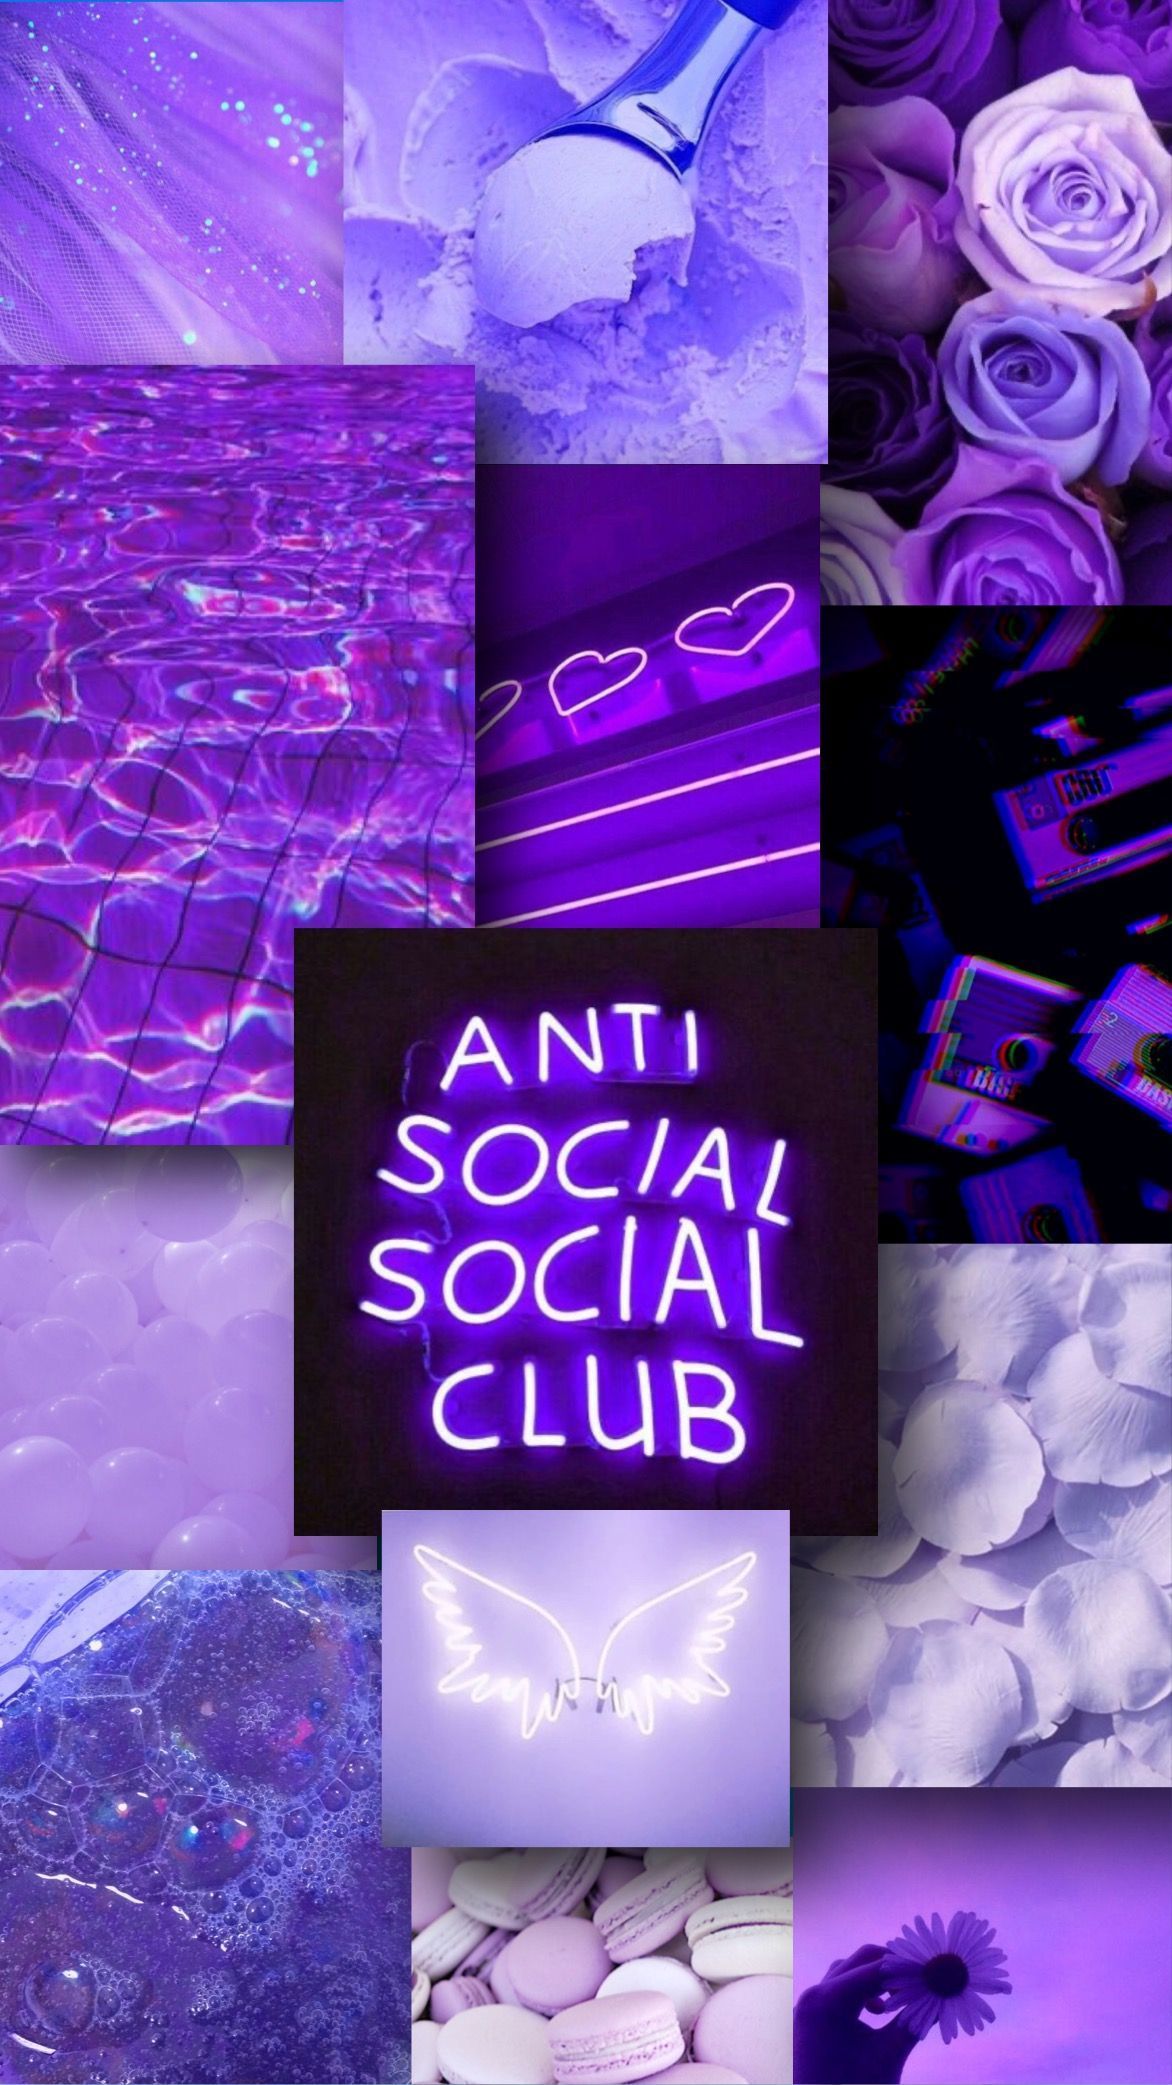 A collage of purple images with the words anti social club - Anti Social Social Club, purple